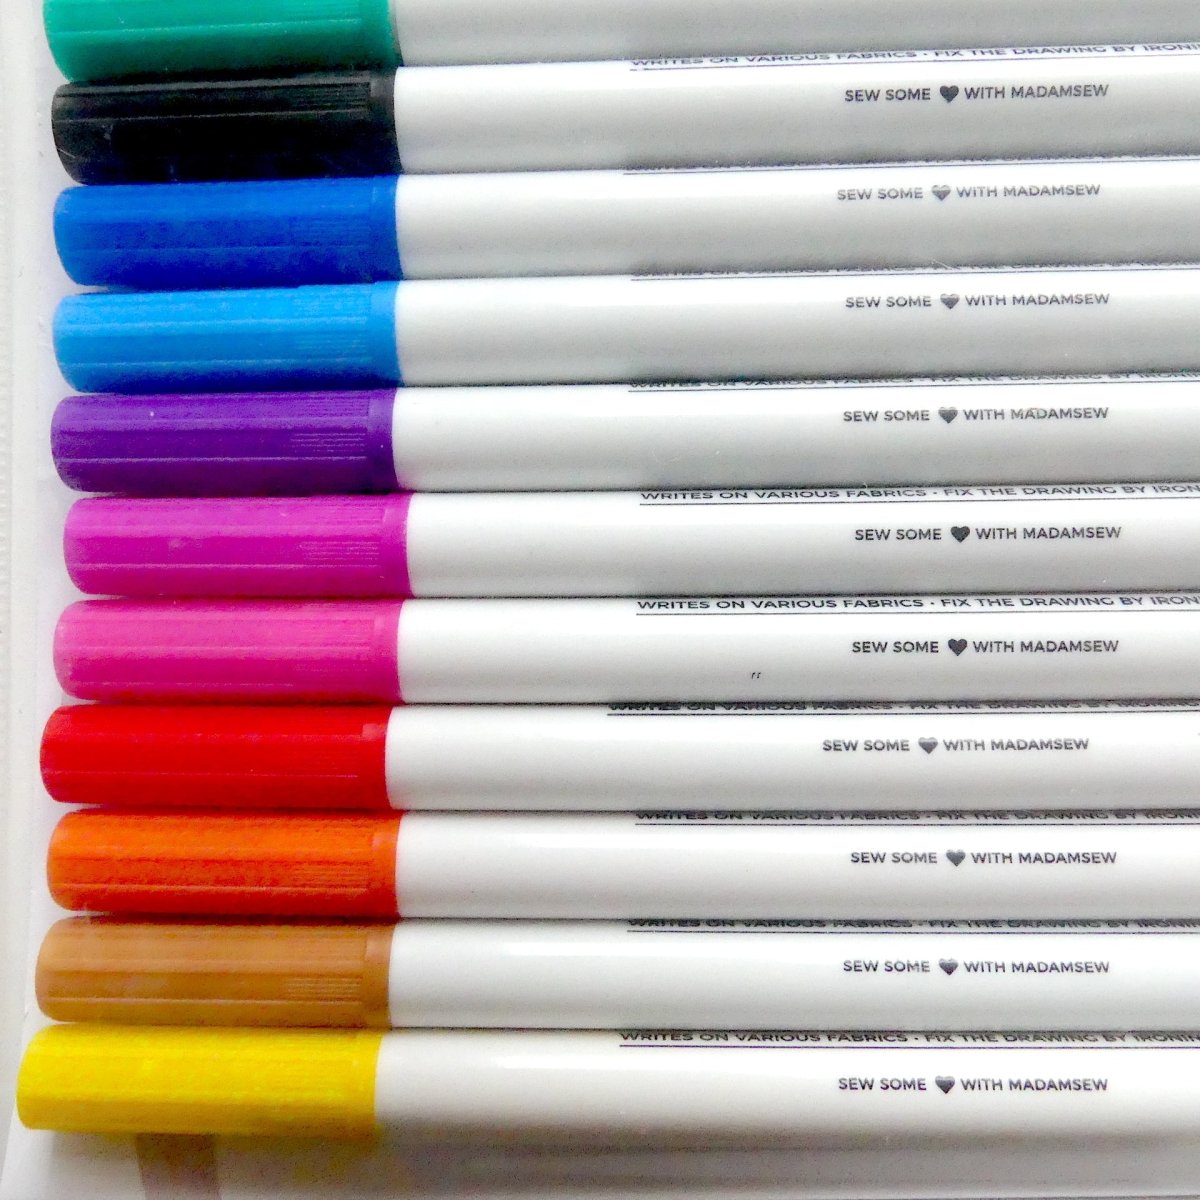 Ten colors of permanent fabric markers in a row